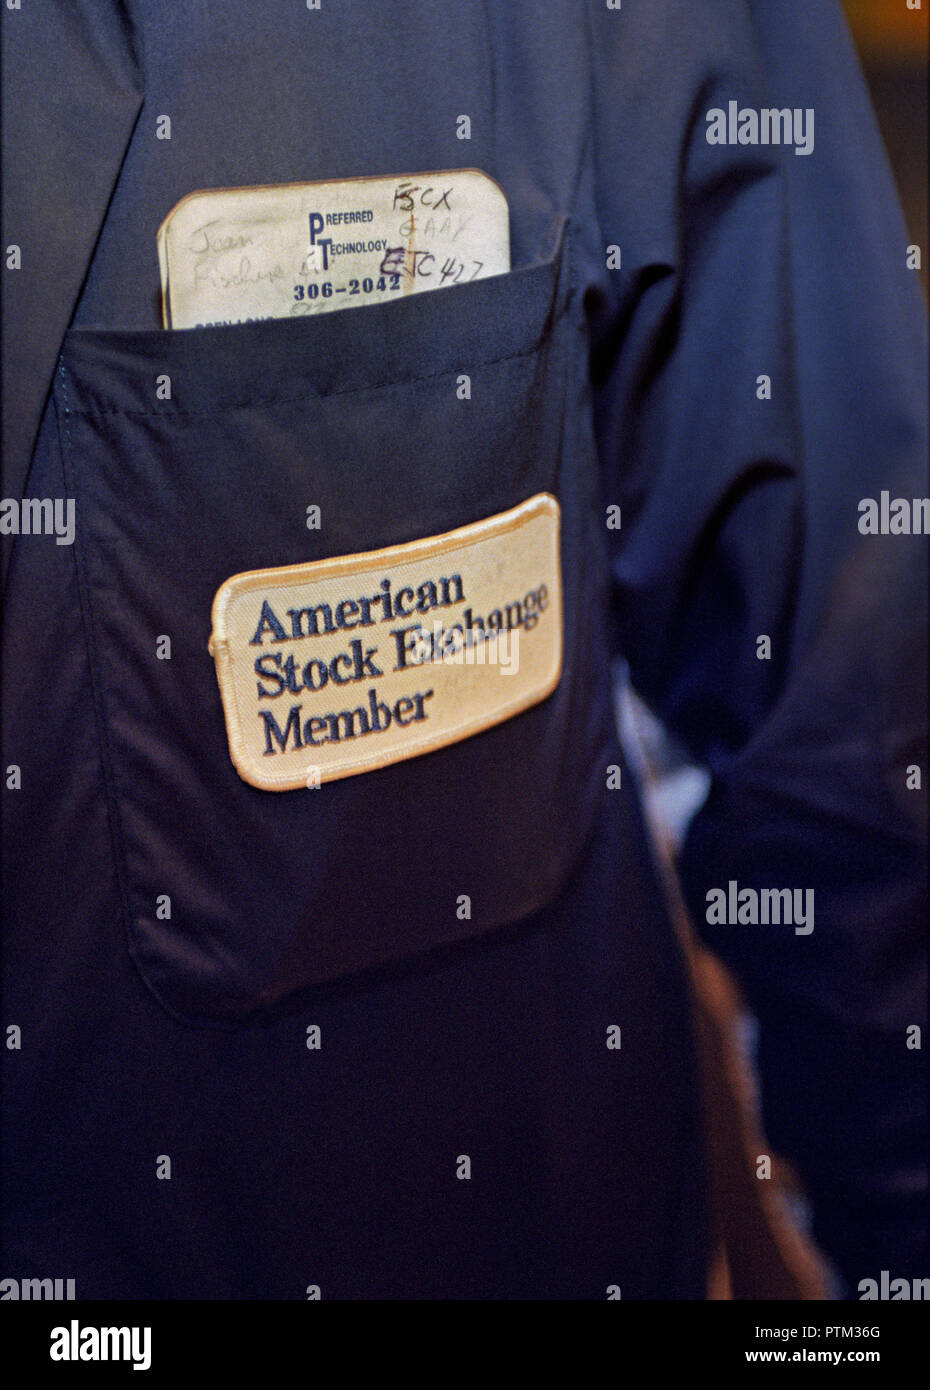 Trading jacket on the AMEX or American Stock Exchange worn by a trader on the trading floor Stock Photo